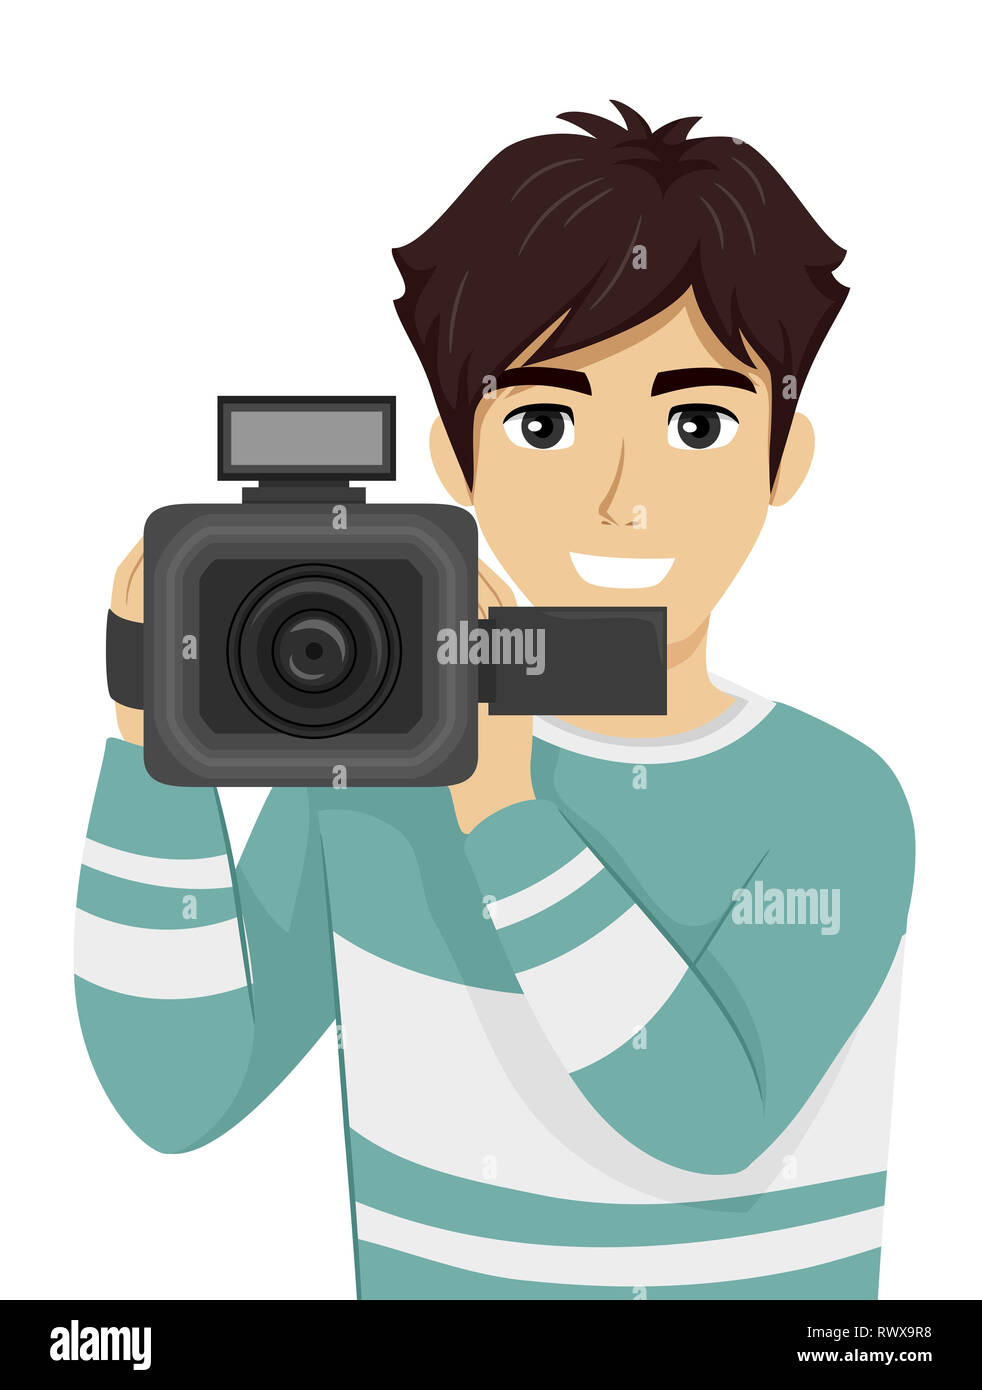 Illustration of a Teenage Guy Holding a Video Camera Filming Stock ...